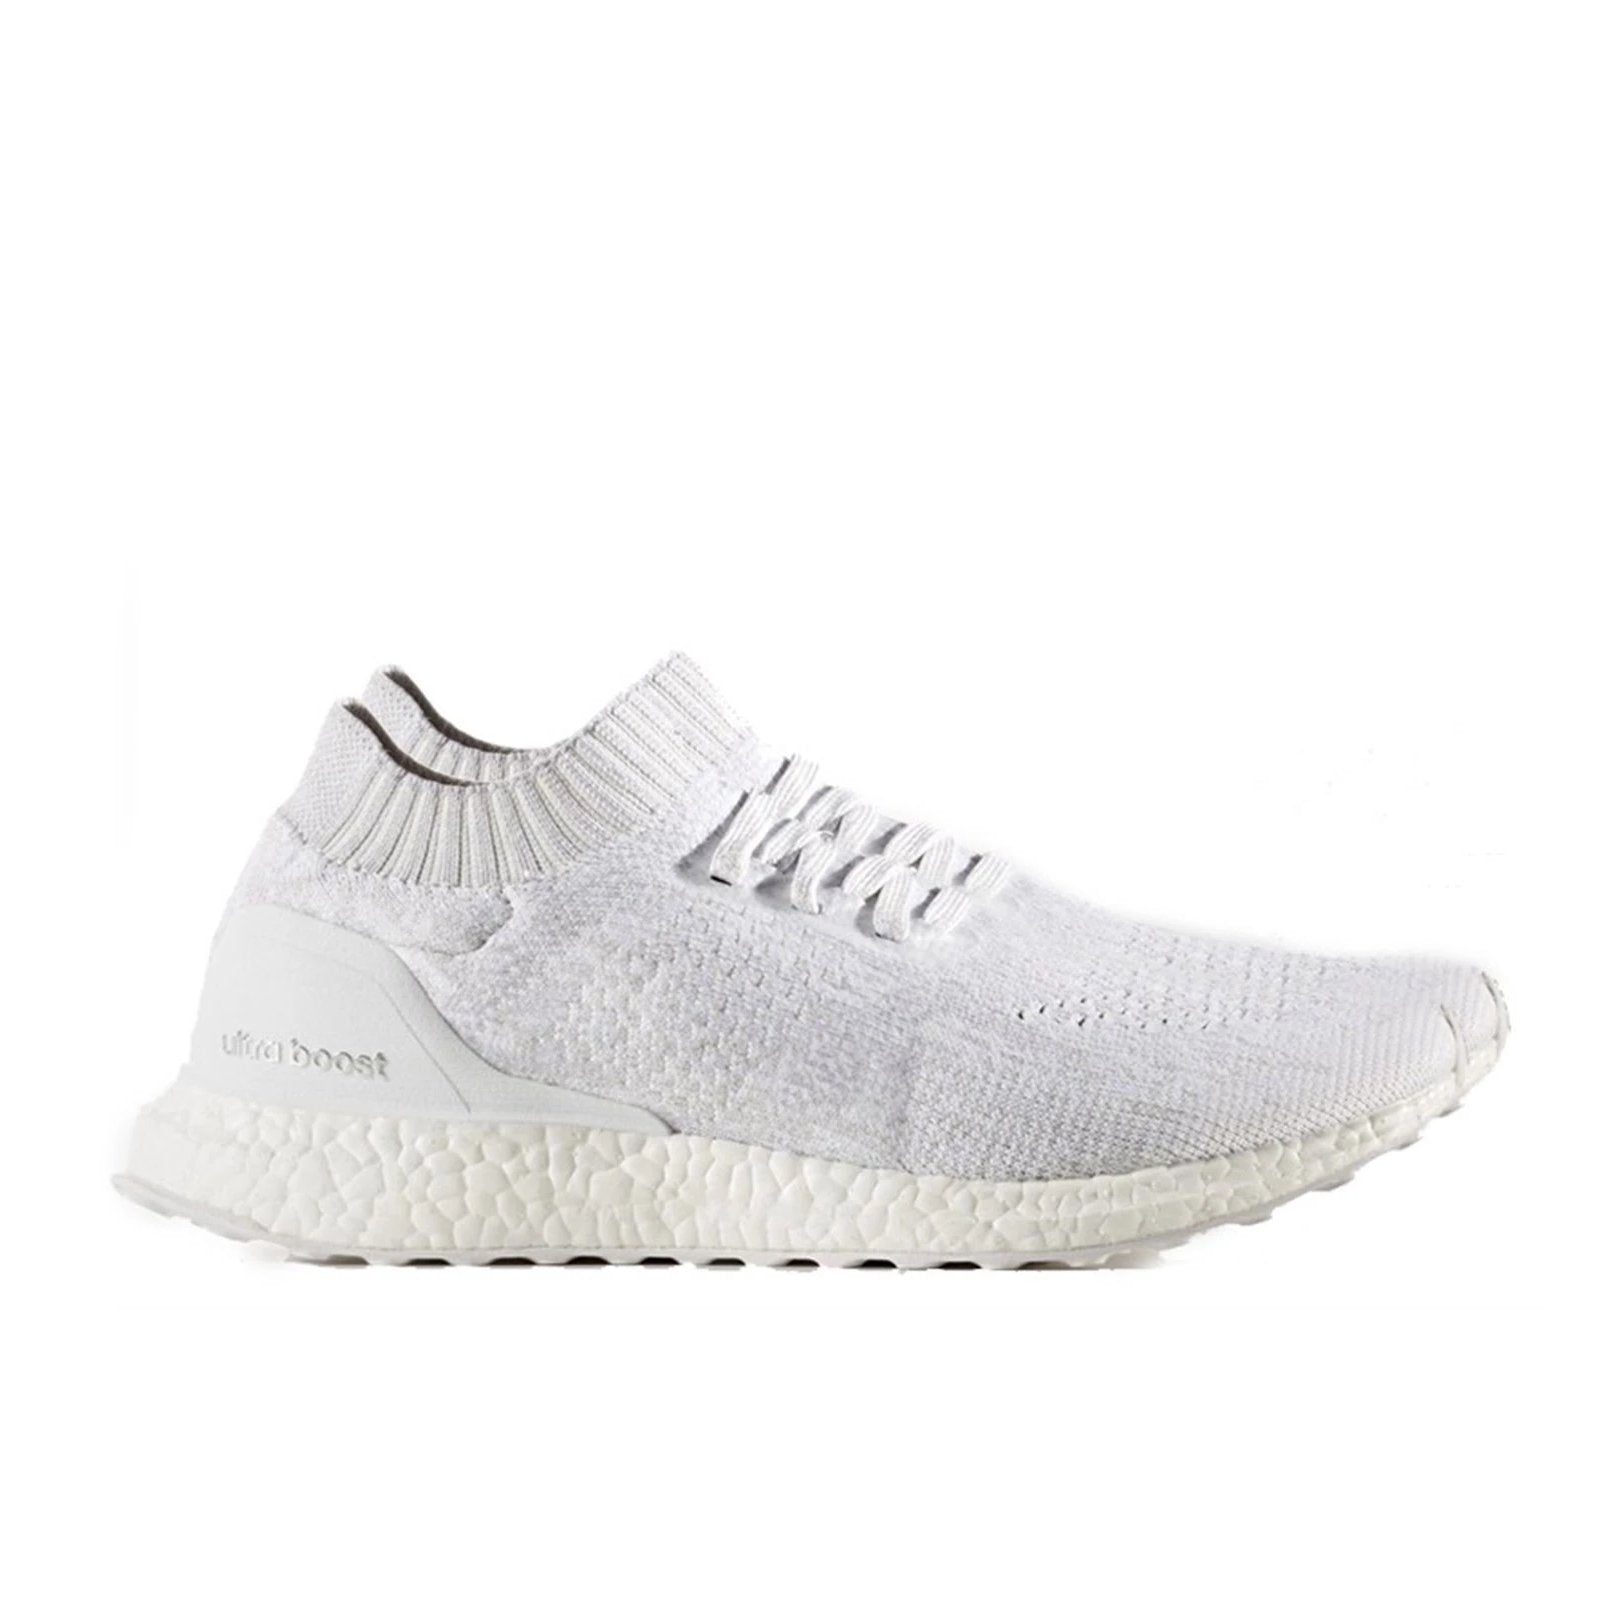 ultra boost uncaged white mens